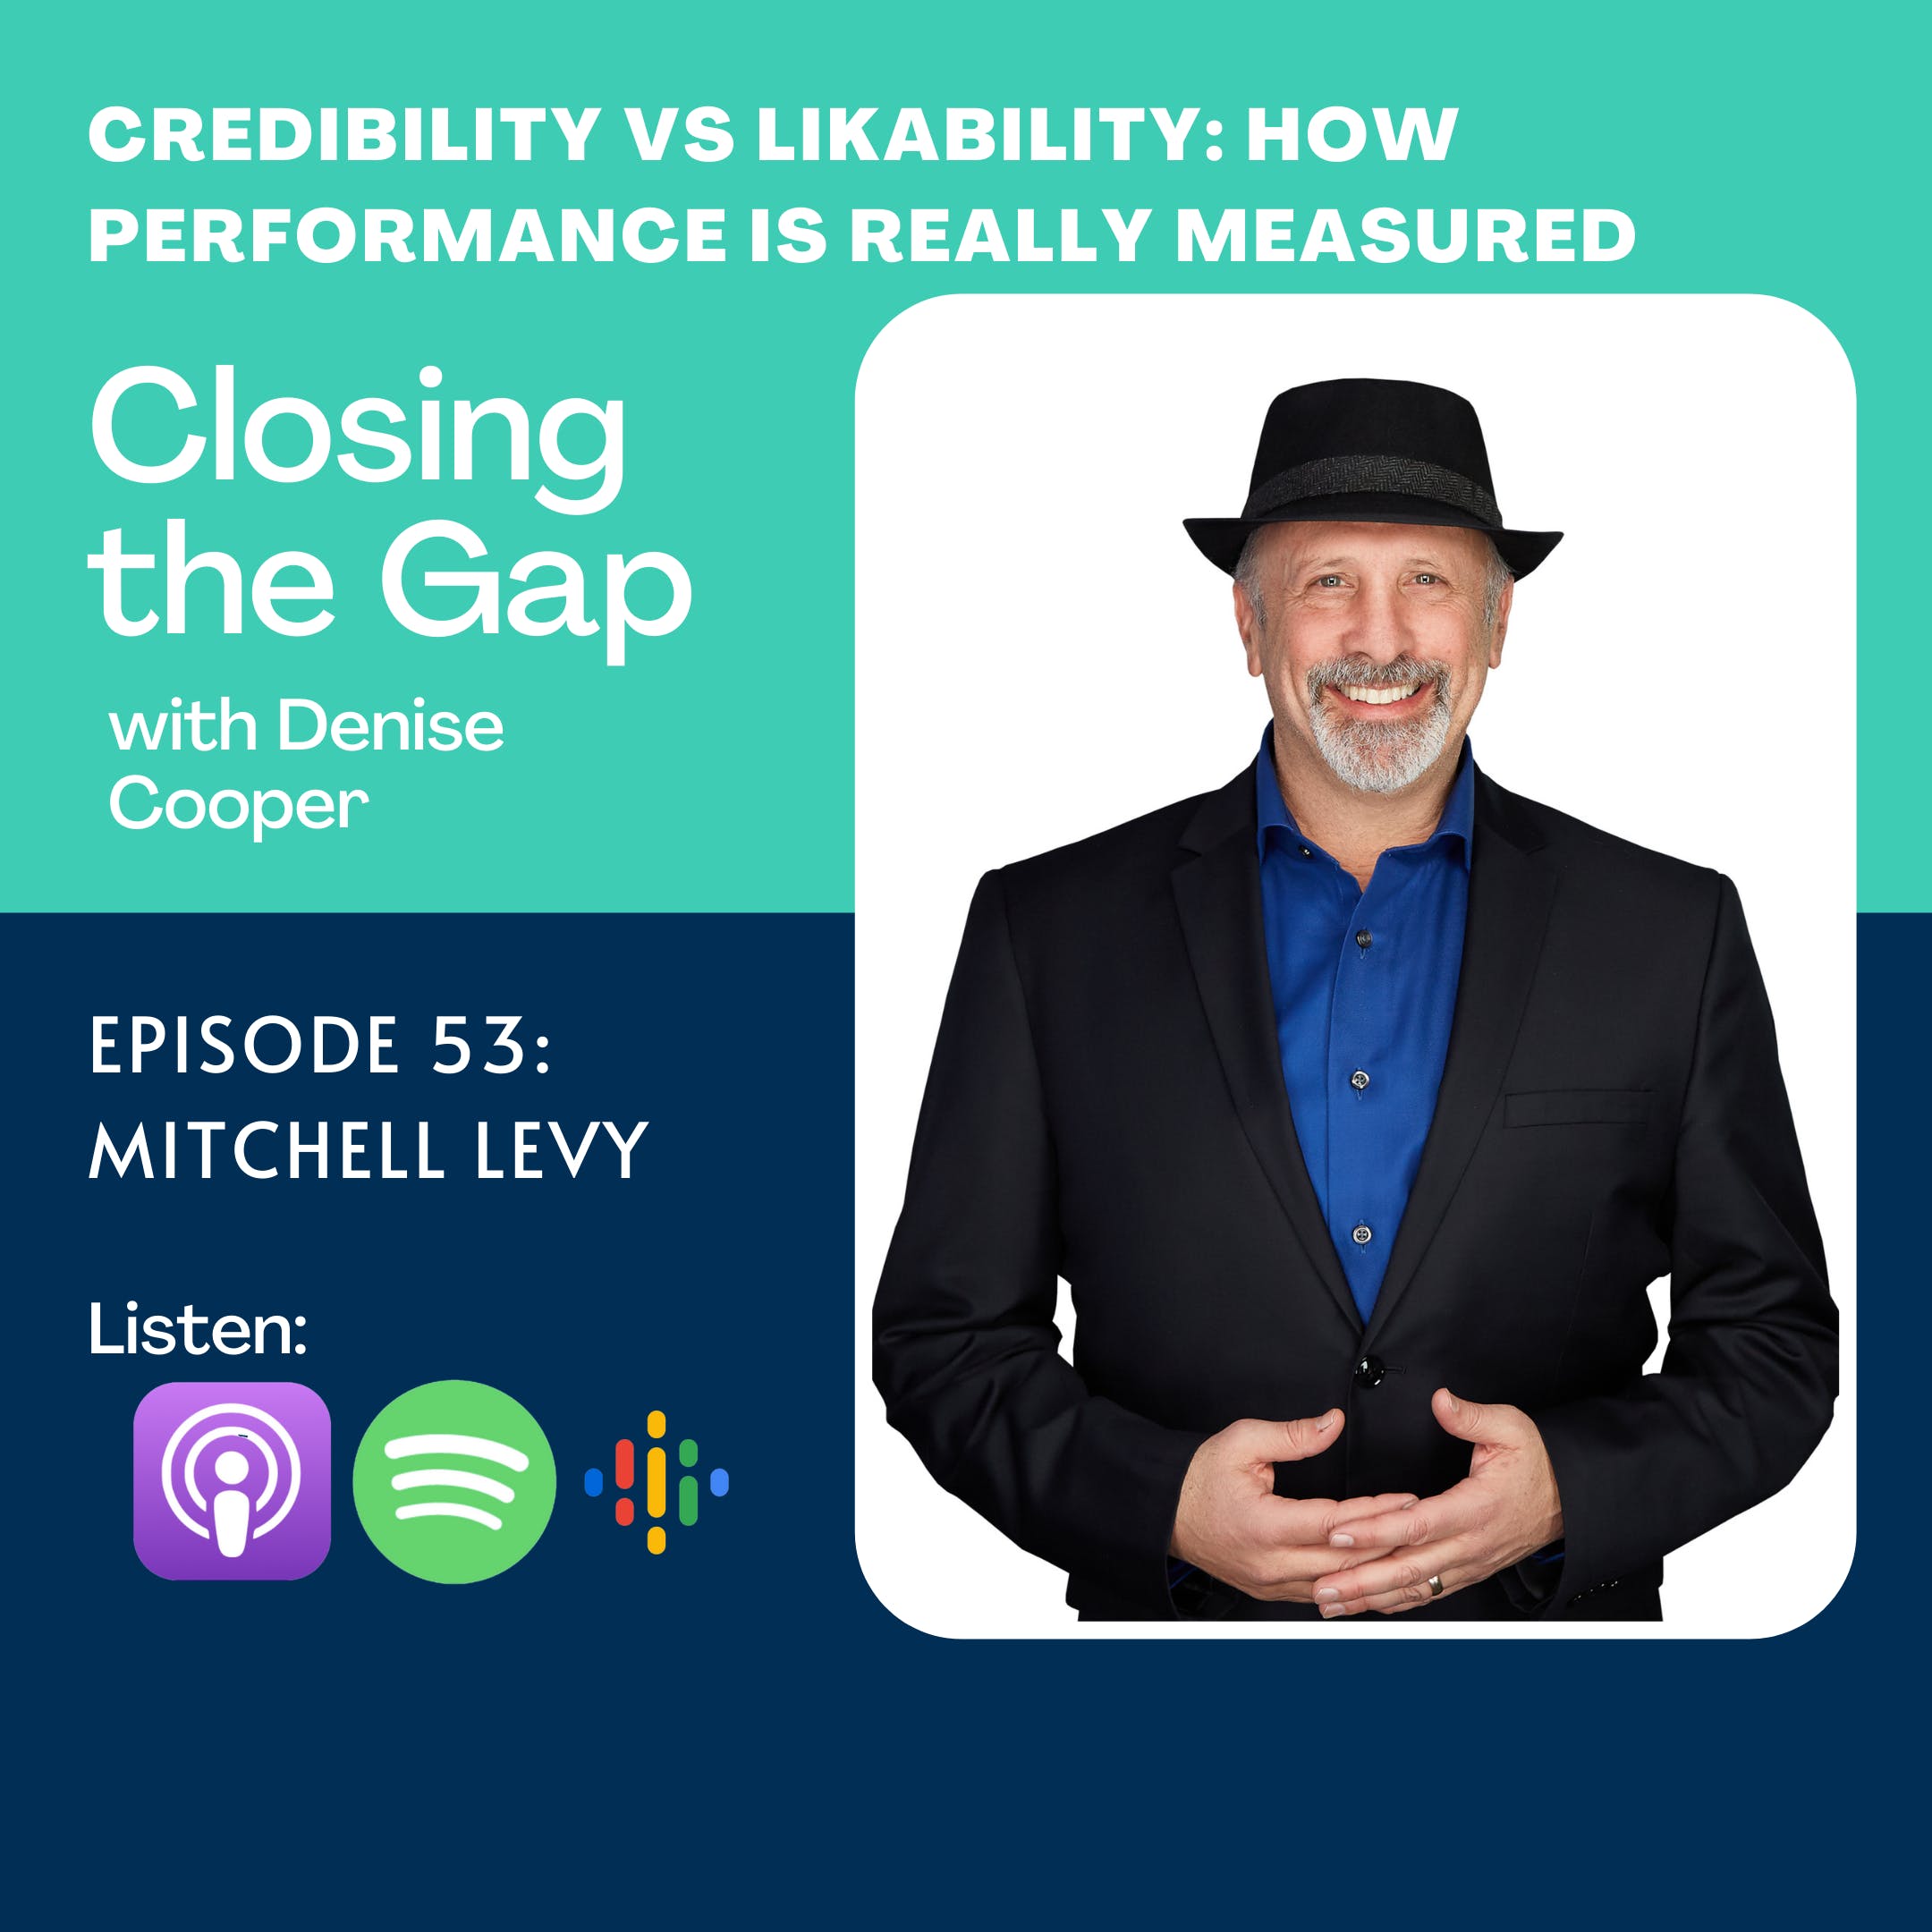 Episode 53: Credibility vs Likability: How performance is really measured